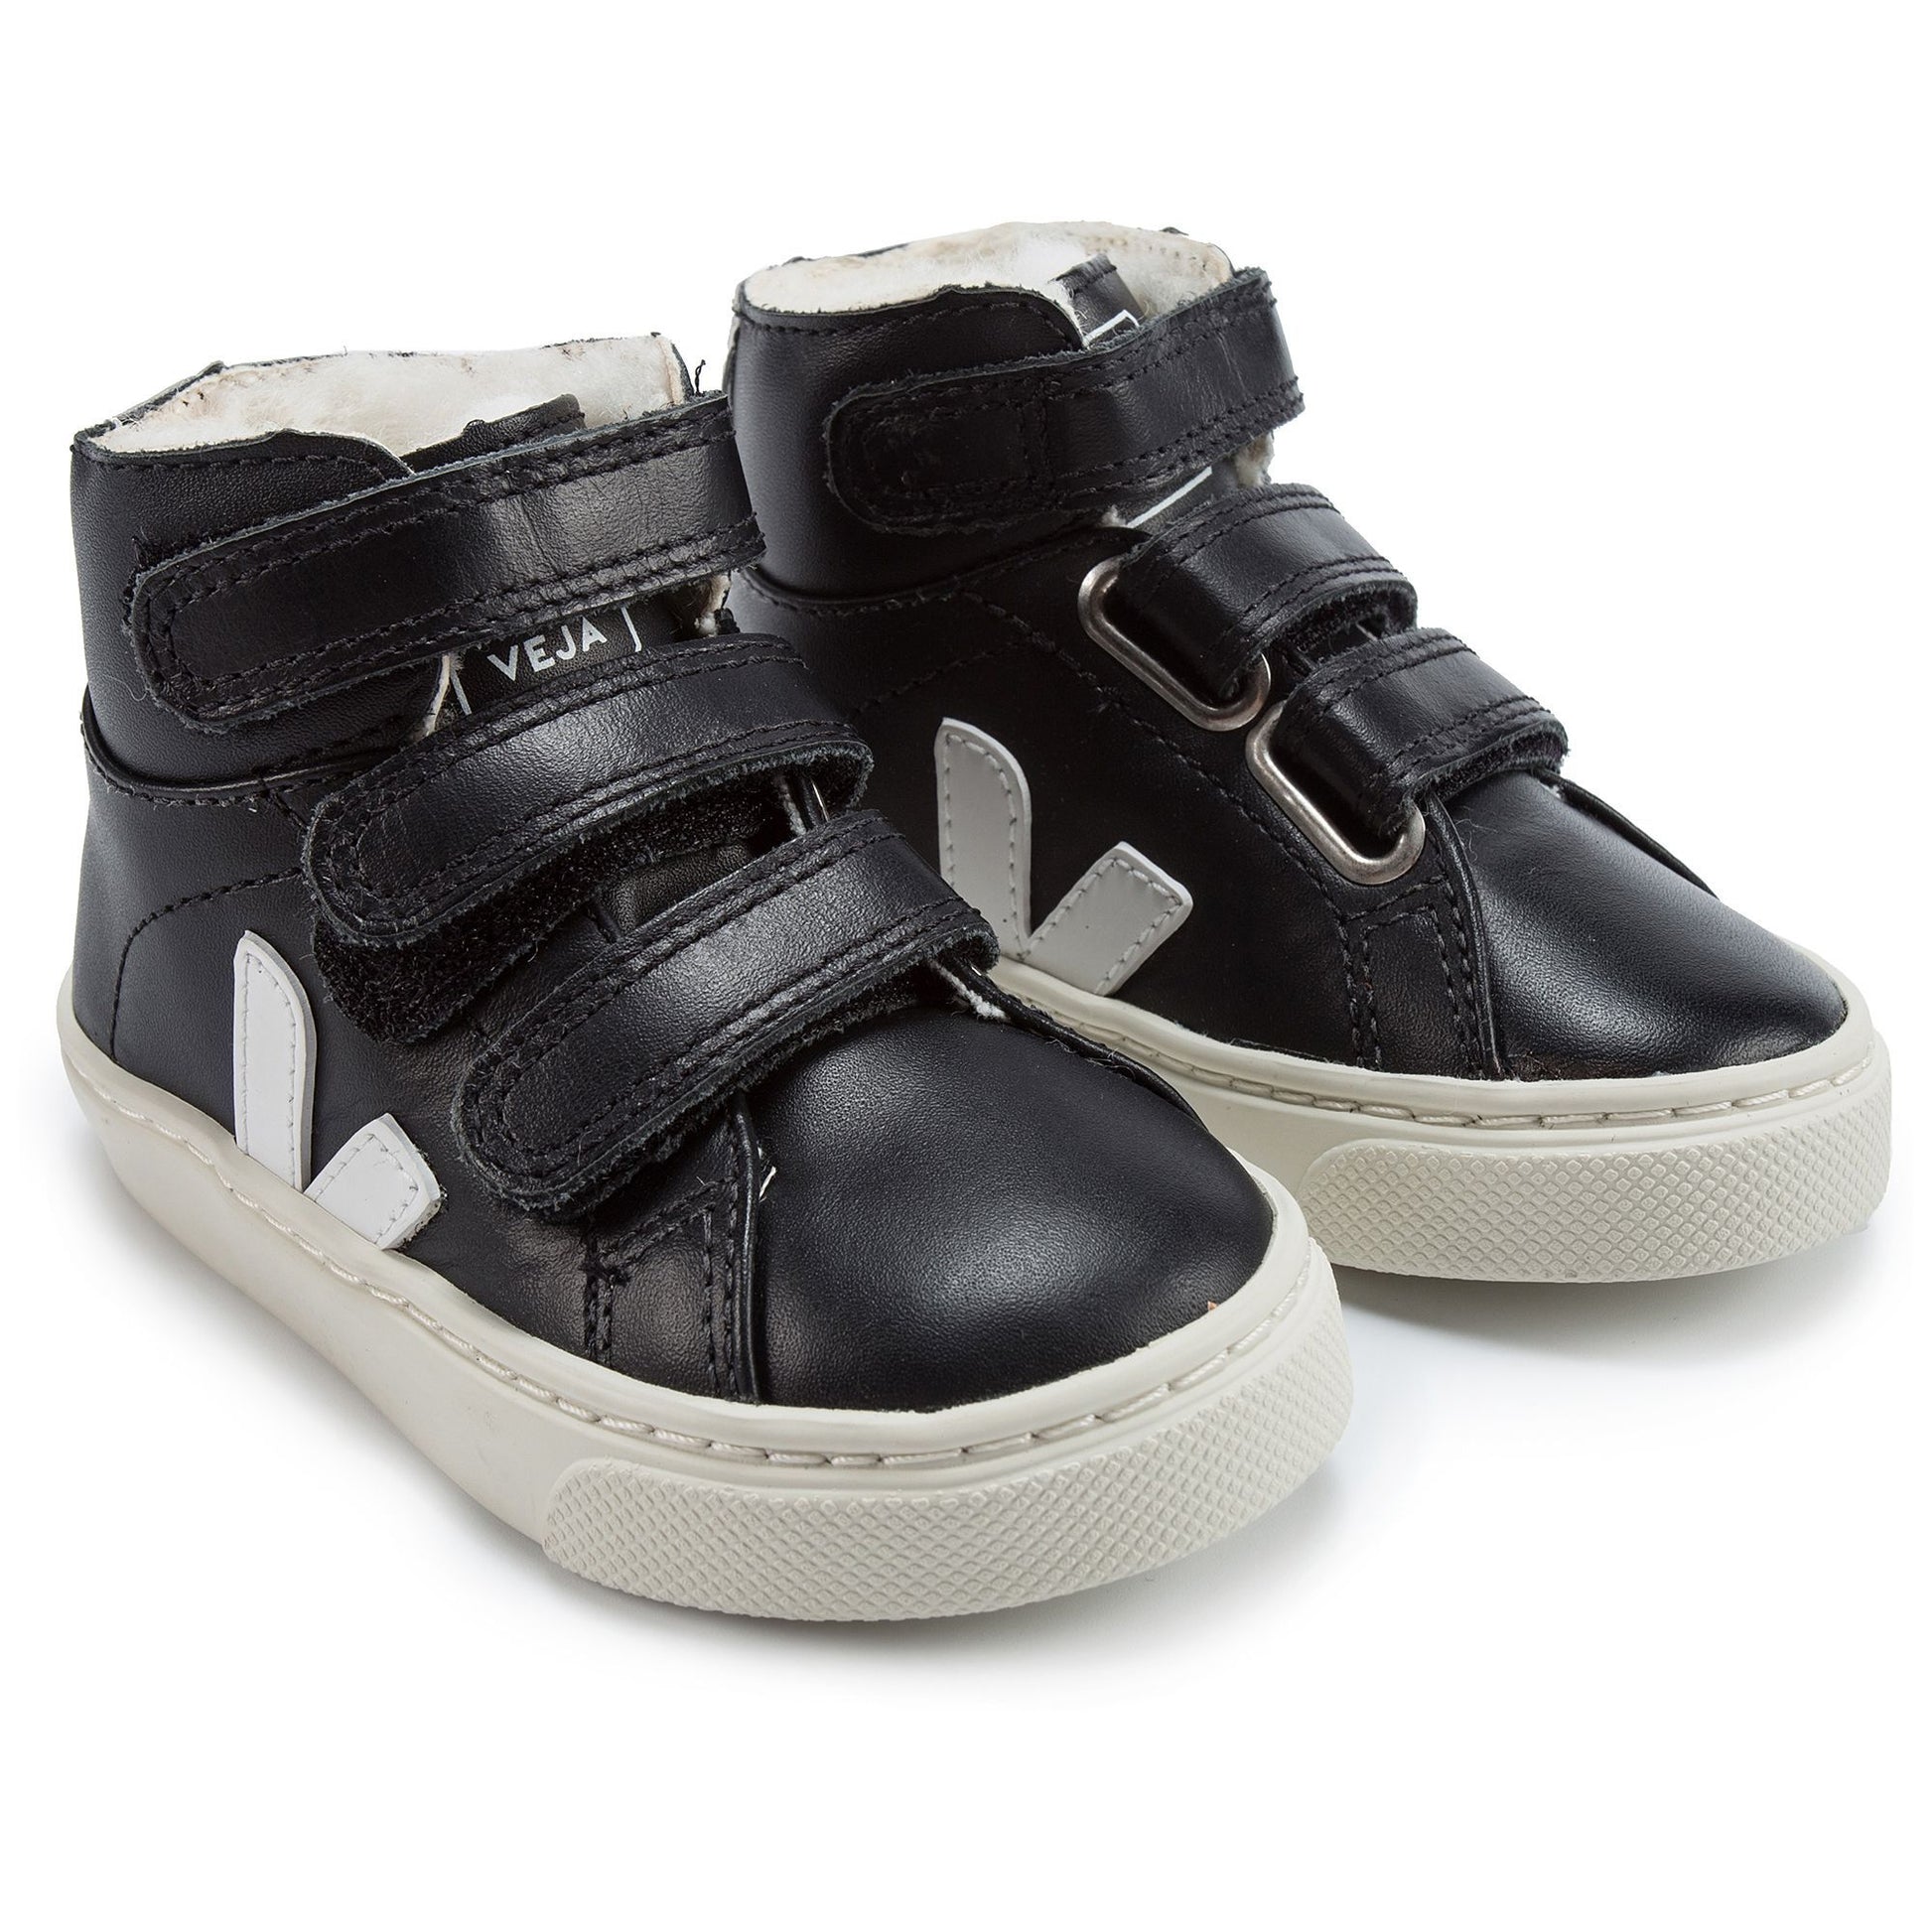 Baby Black Leather Velcro High Top Shoes - Cemarose Children's Fashion Boutique